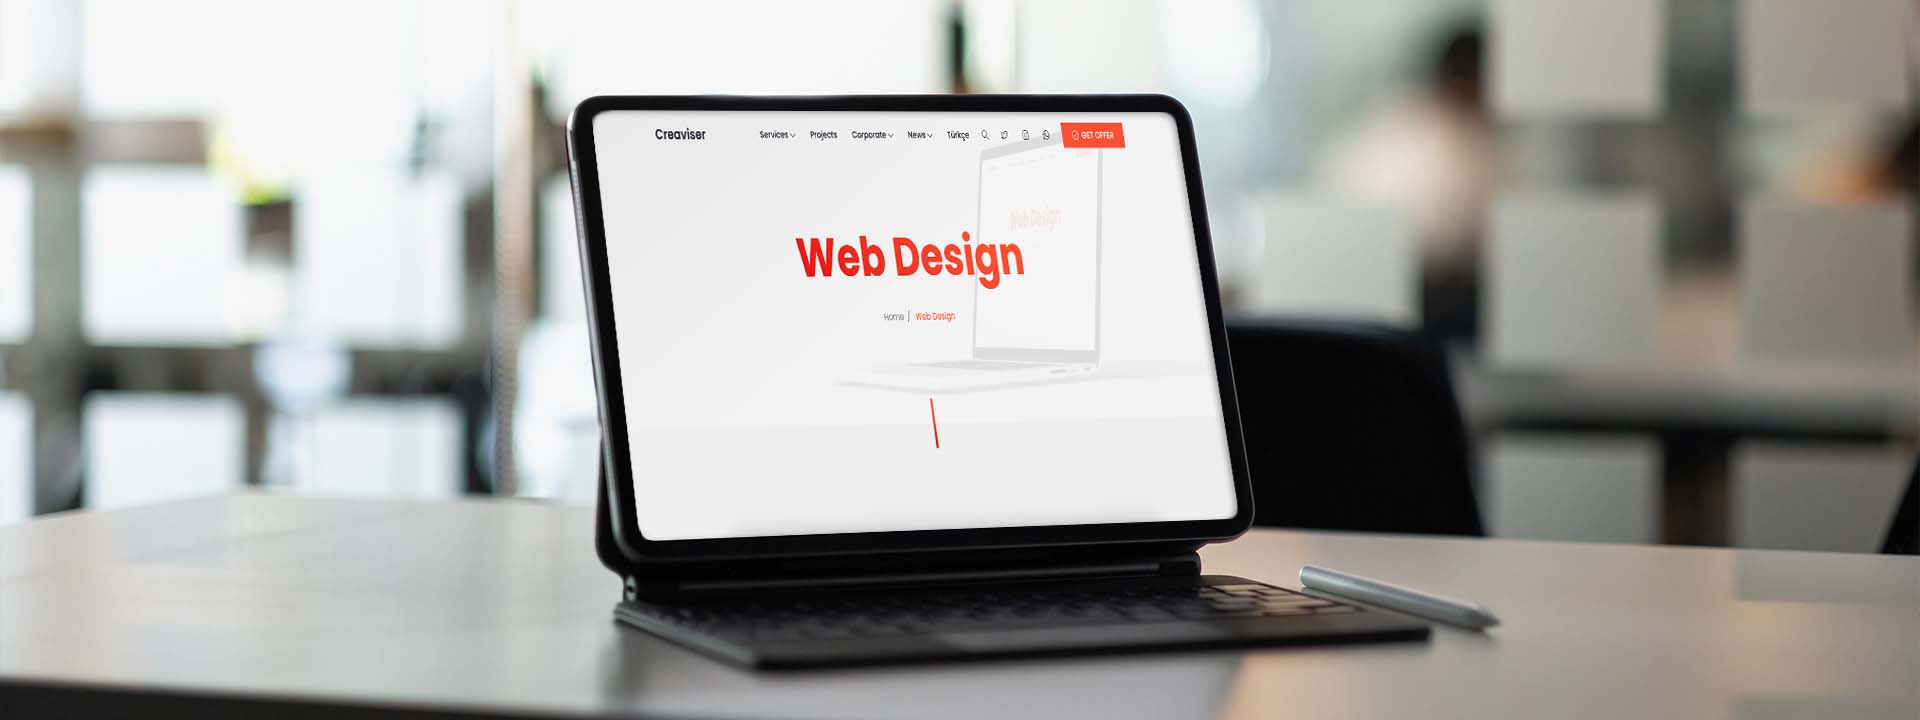 Web Design Frequently Asked Questions